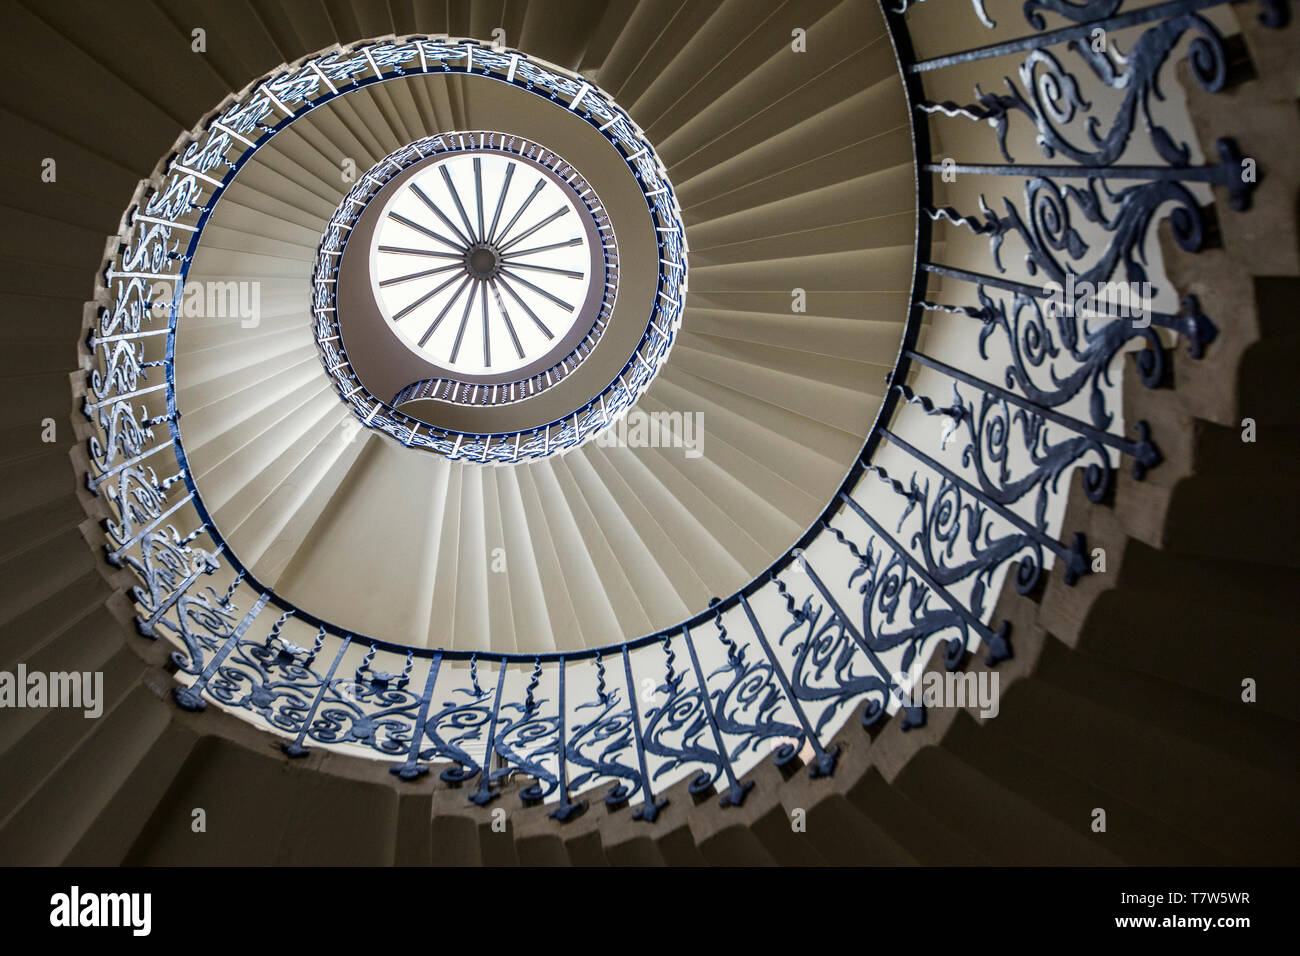 London, UK - April 19th 2019: A view of the stunning Tulip Stairs at Queens House in Greenwich, London. The iron structure was the first geometric sel Stock Photo